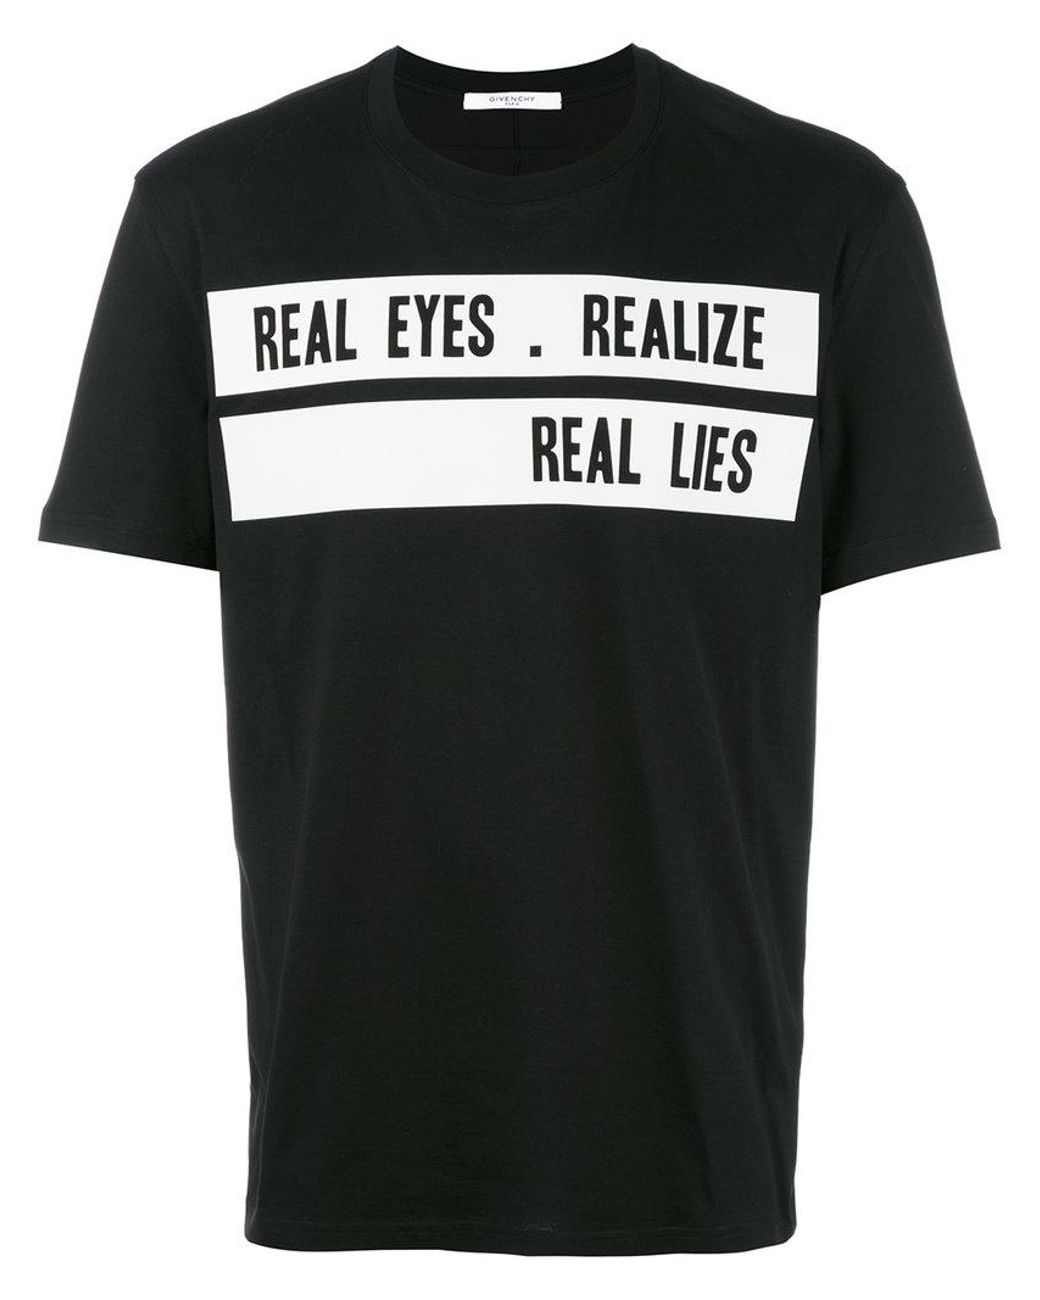 Total 52+ imagen real eyes realize real lies givenchy